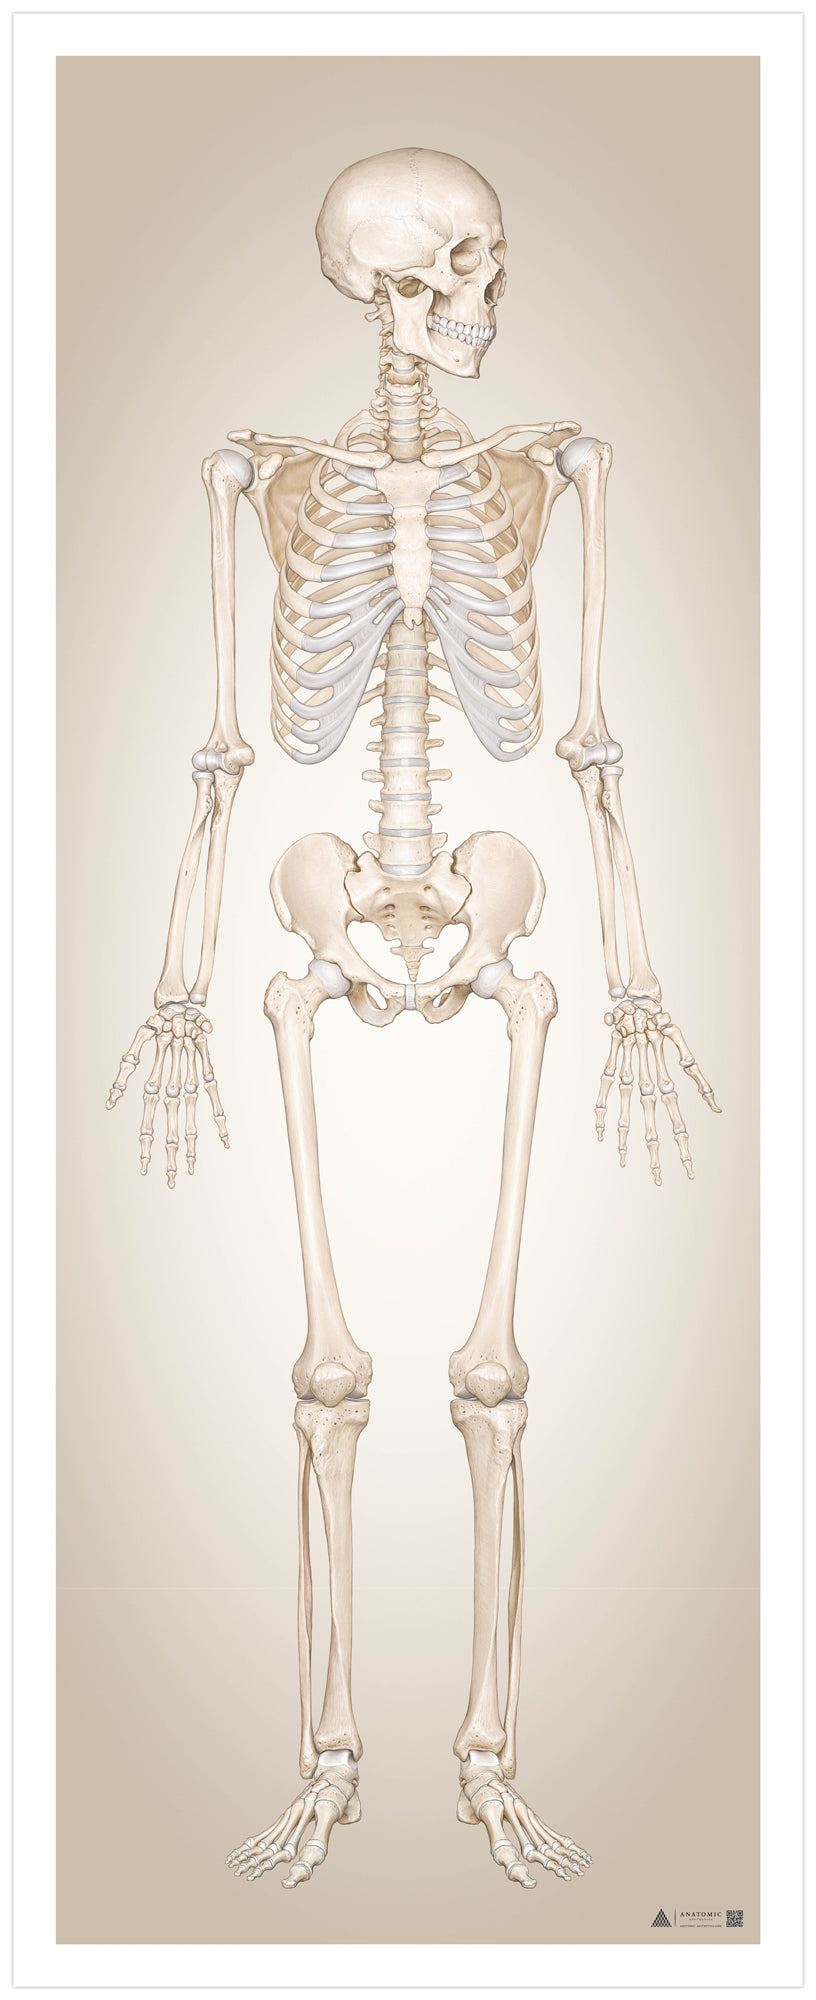 The skeletal system in large format seen from the front